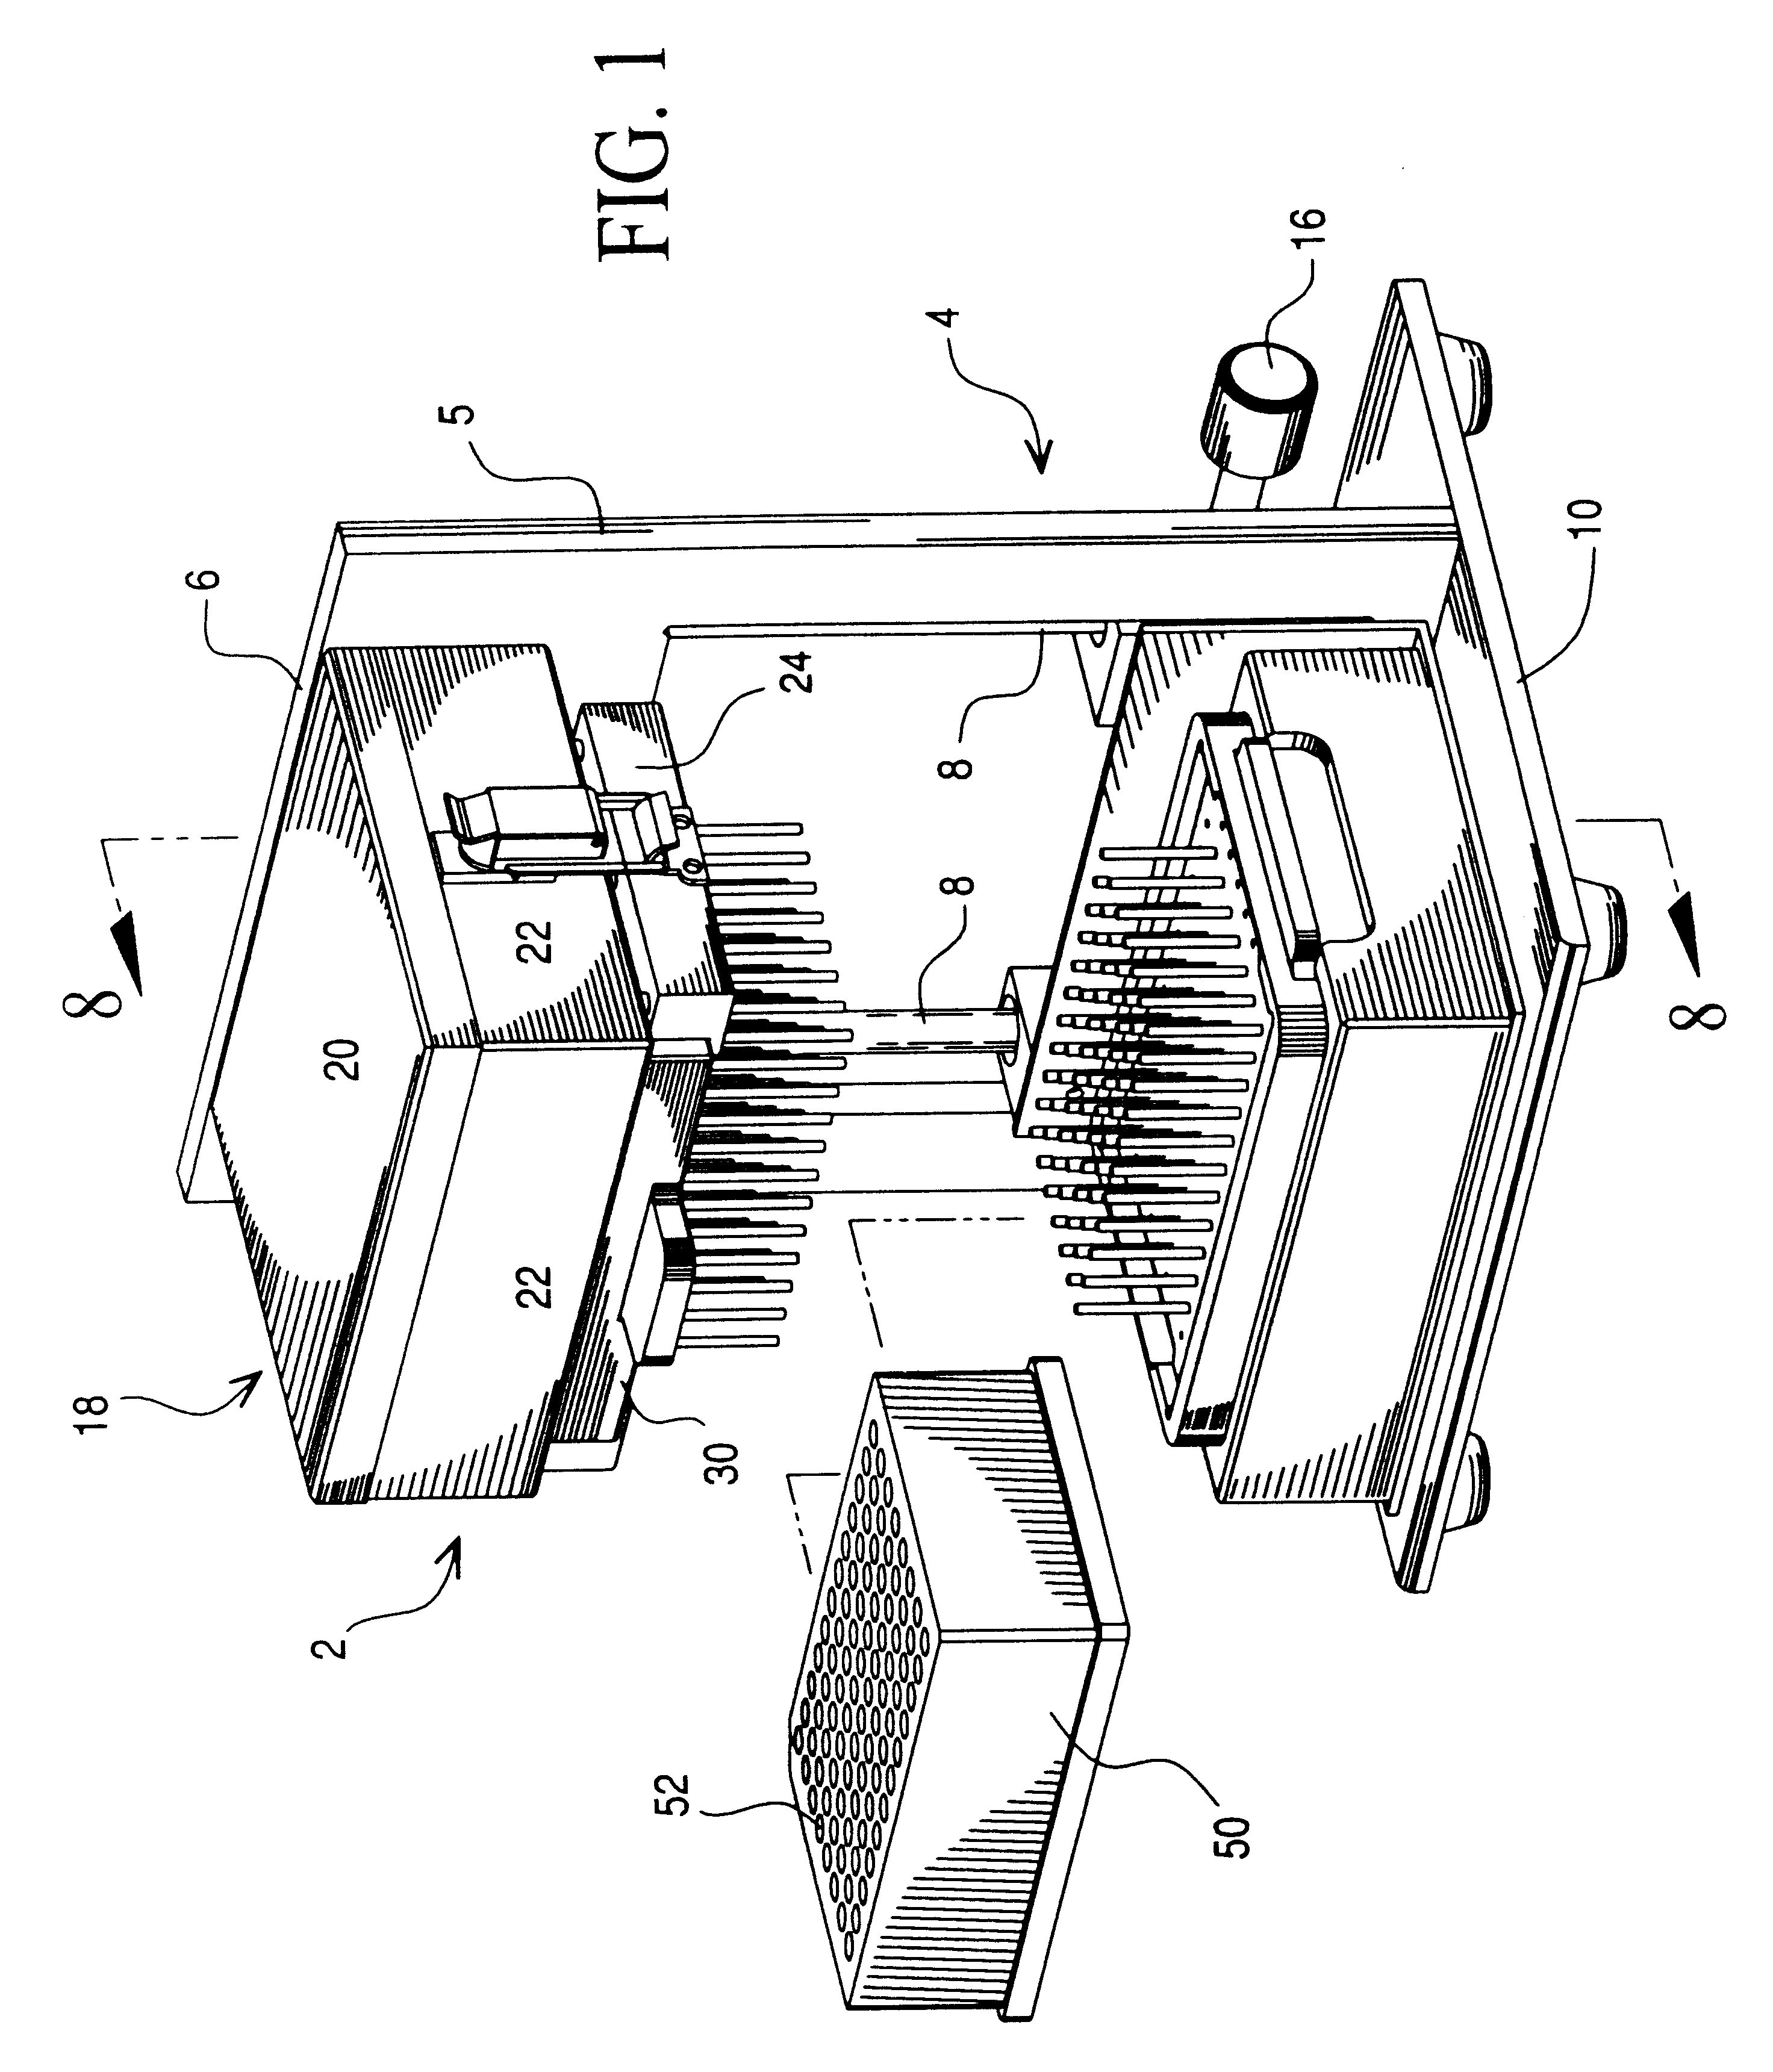 Solid phase evaporator device